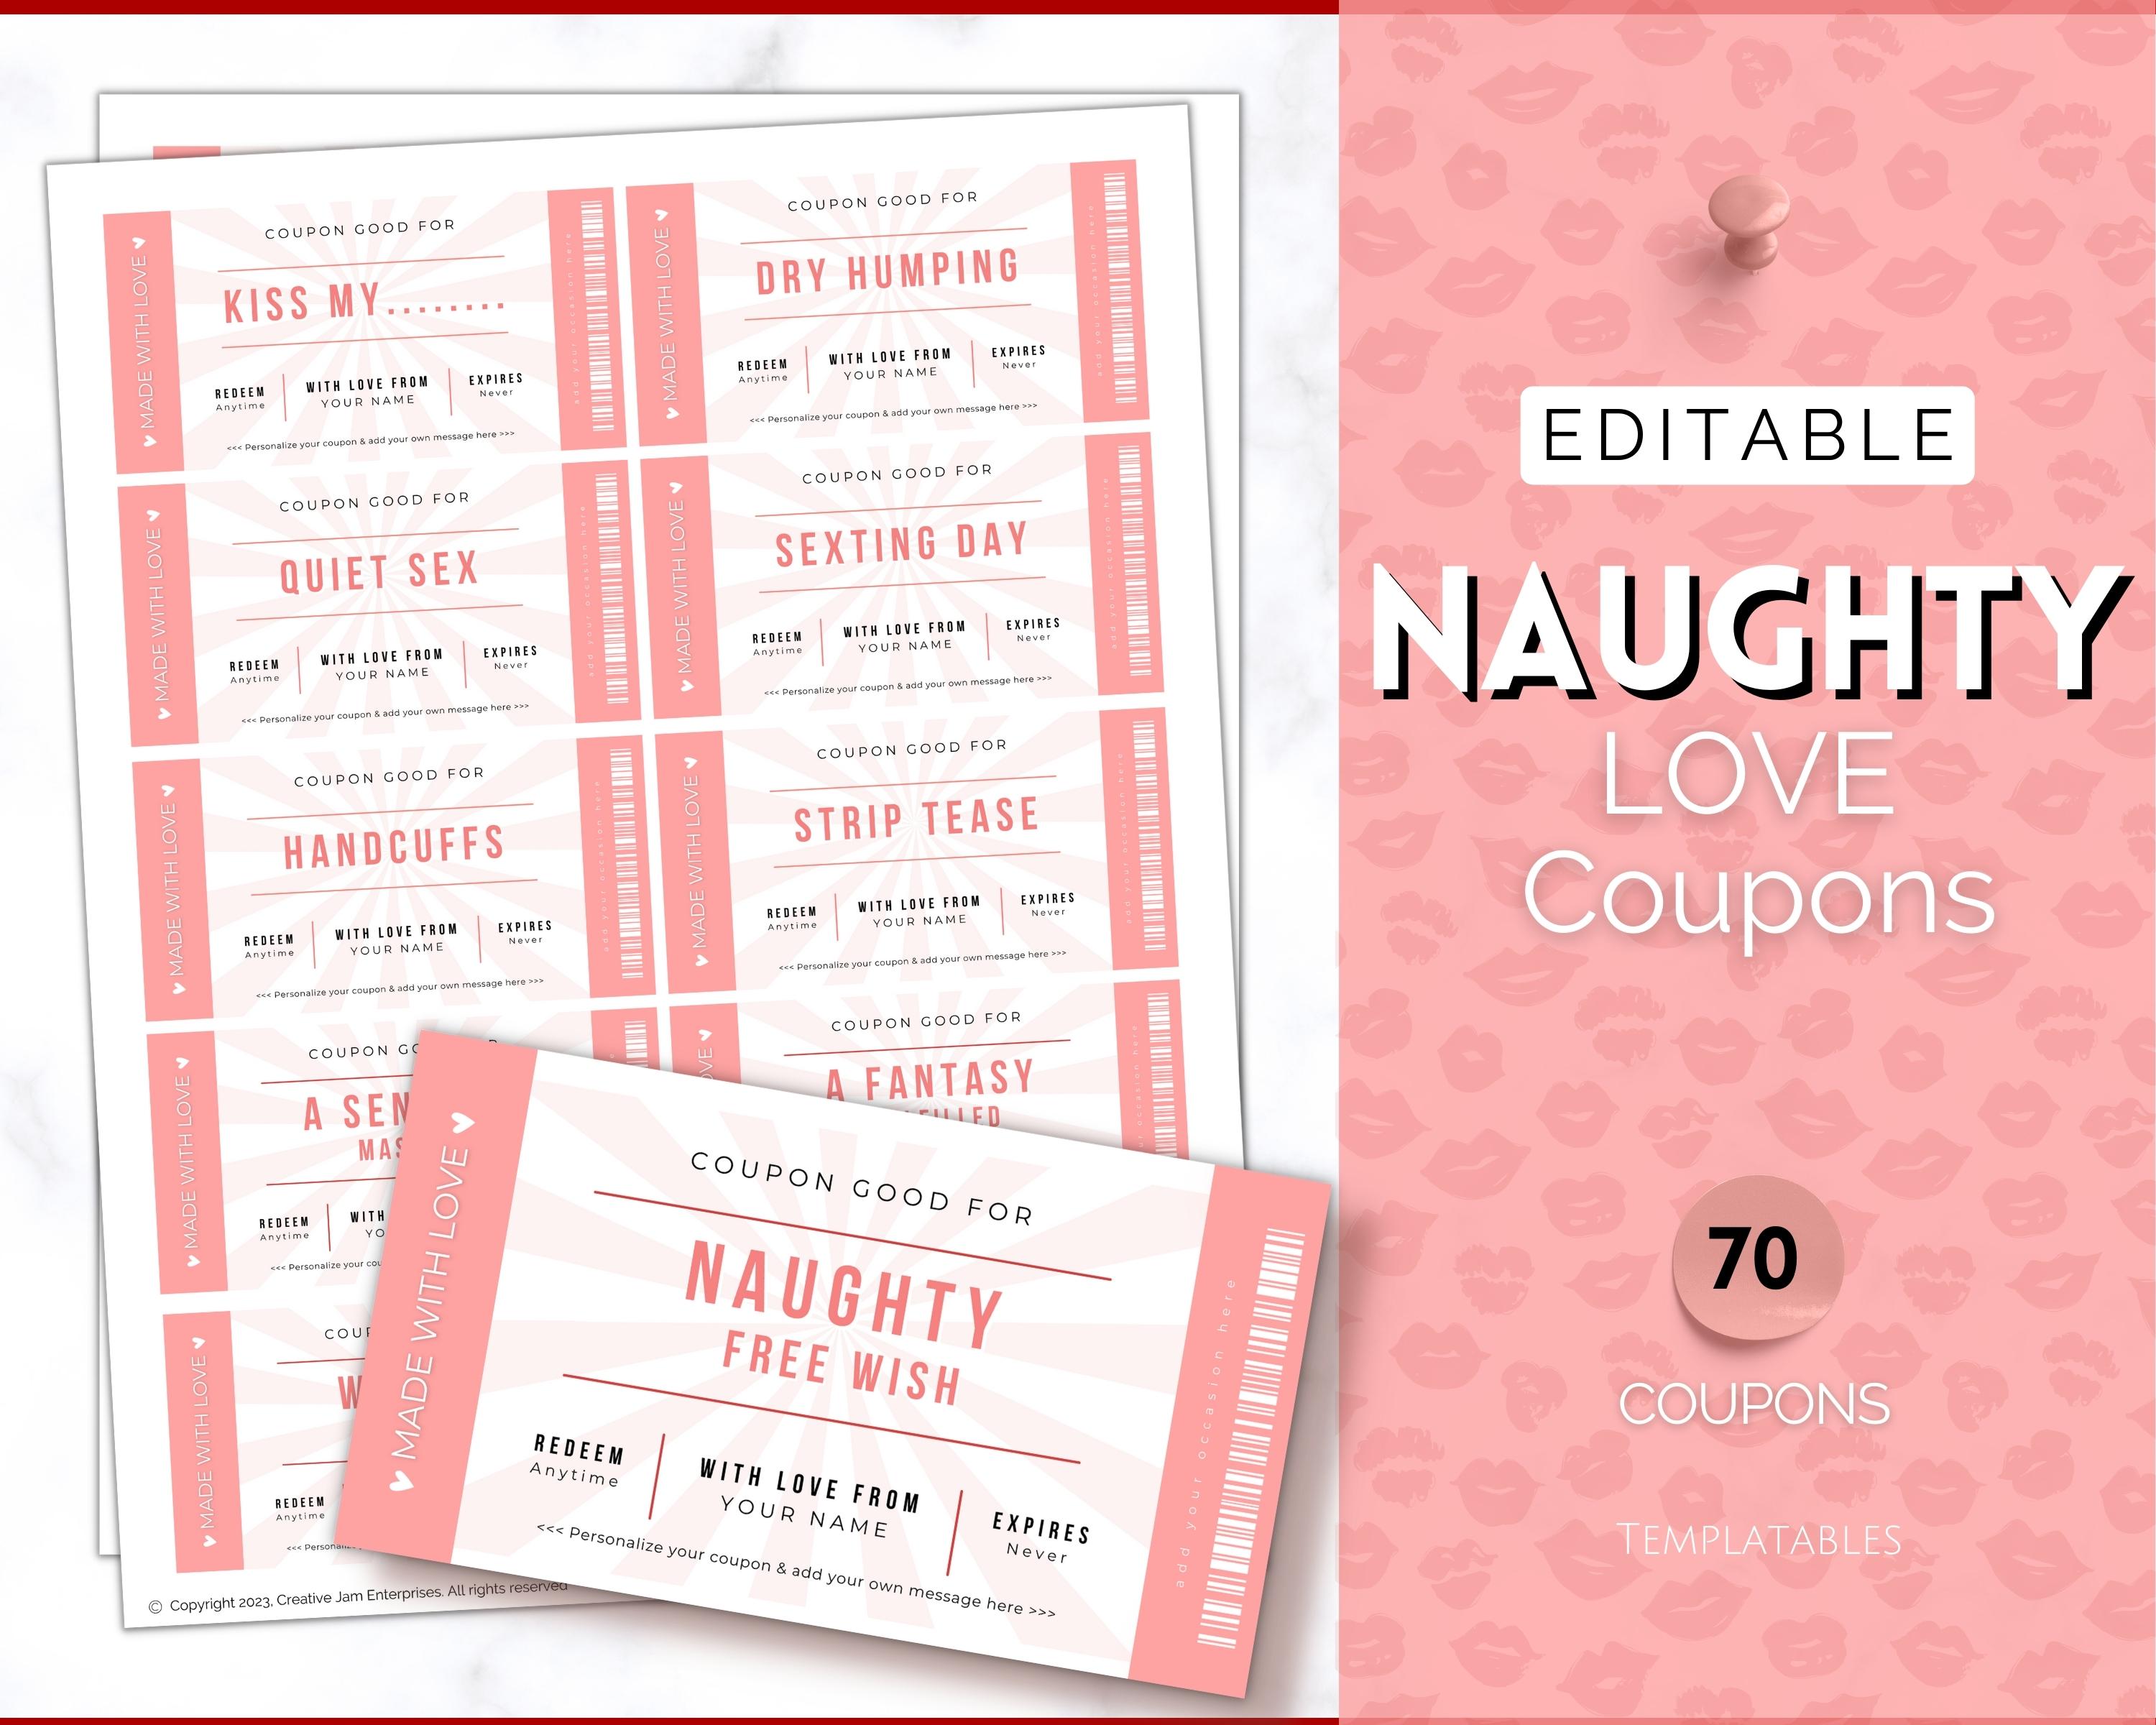 You're my valentine: 52 Hot and Naughty Sex Coupons Book/sex